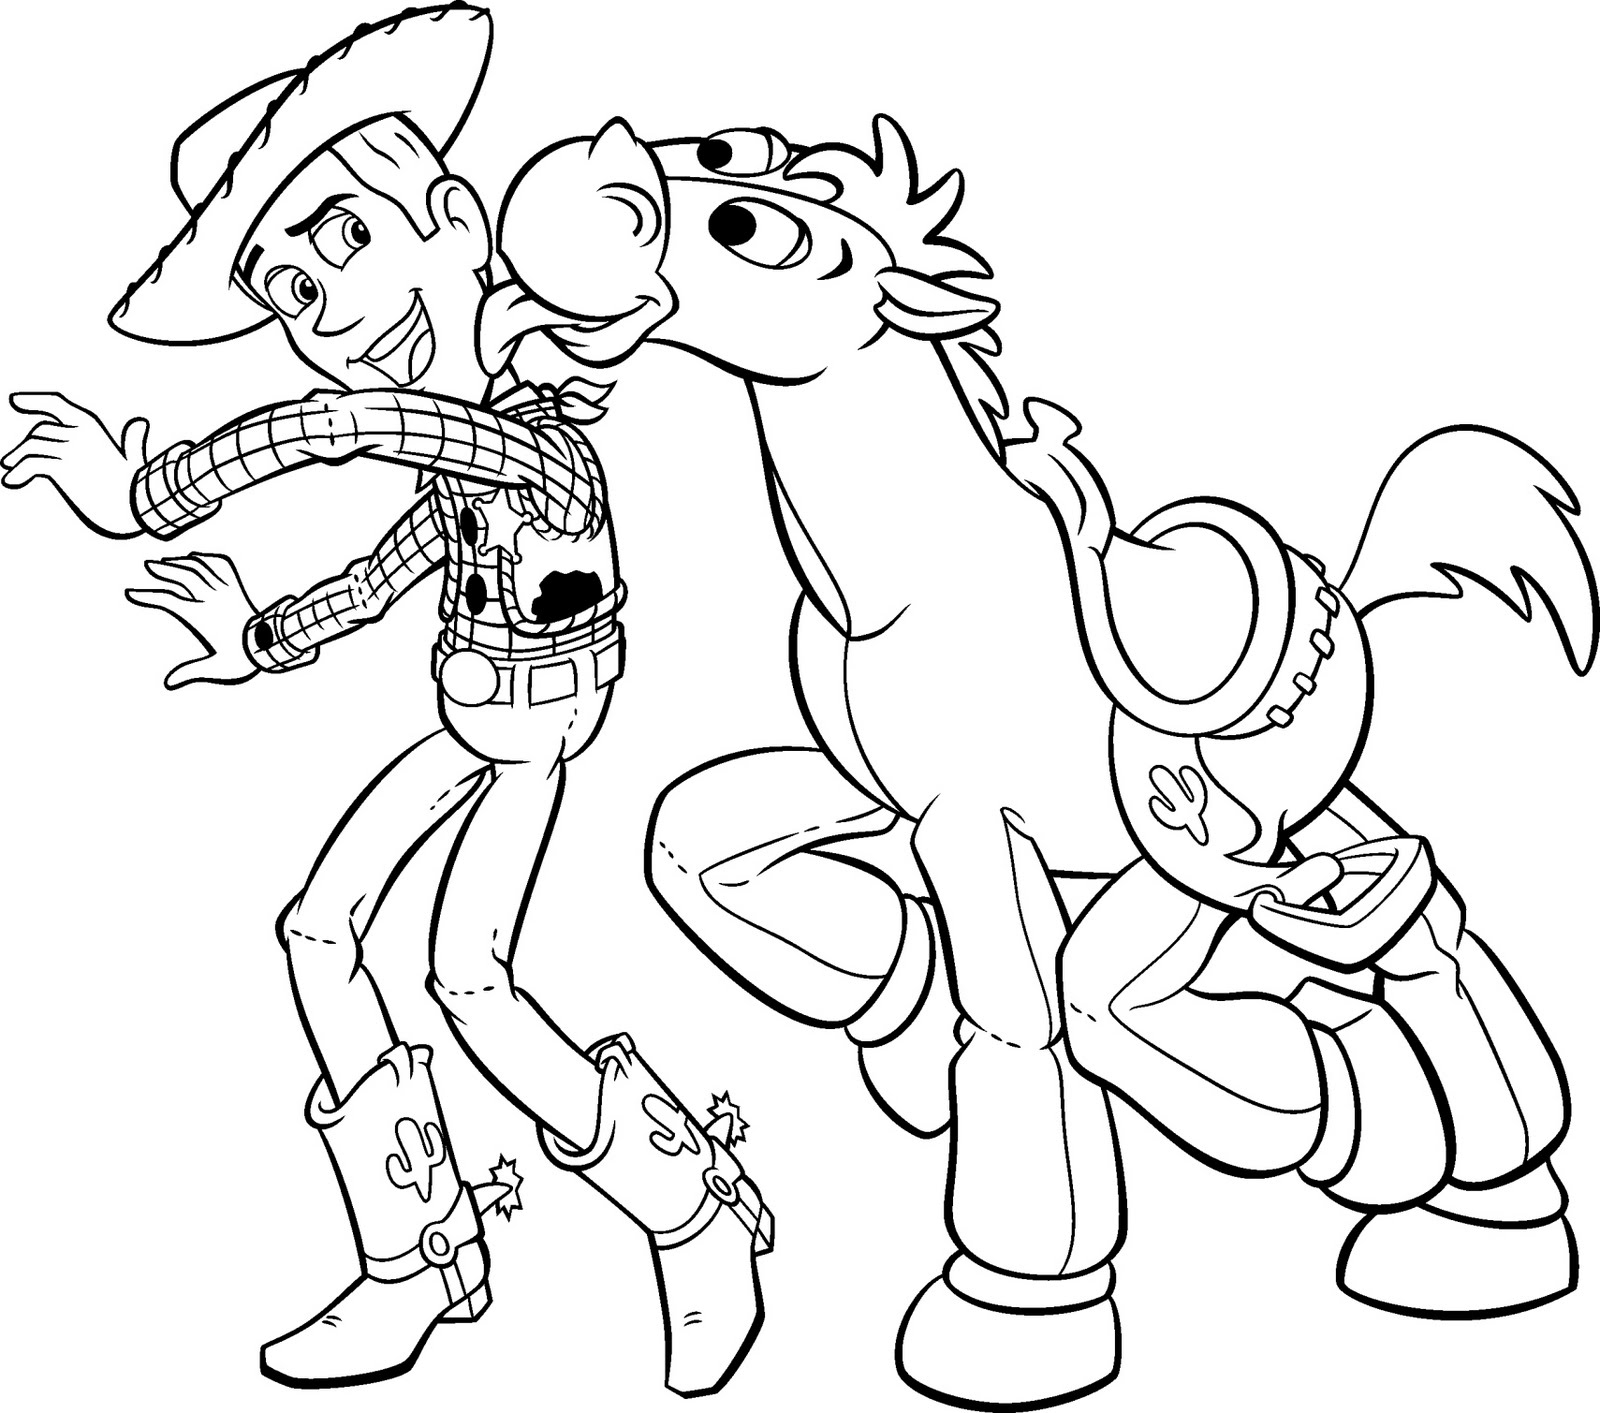 Woody and Bullseye Toy Story Coloring Page